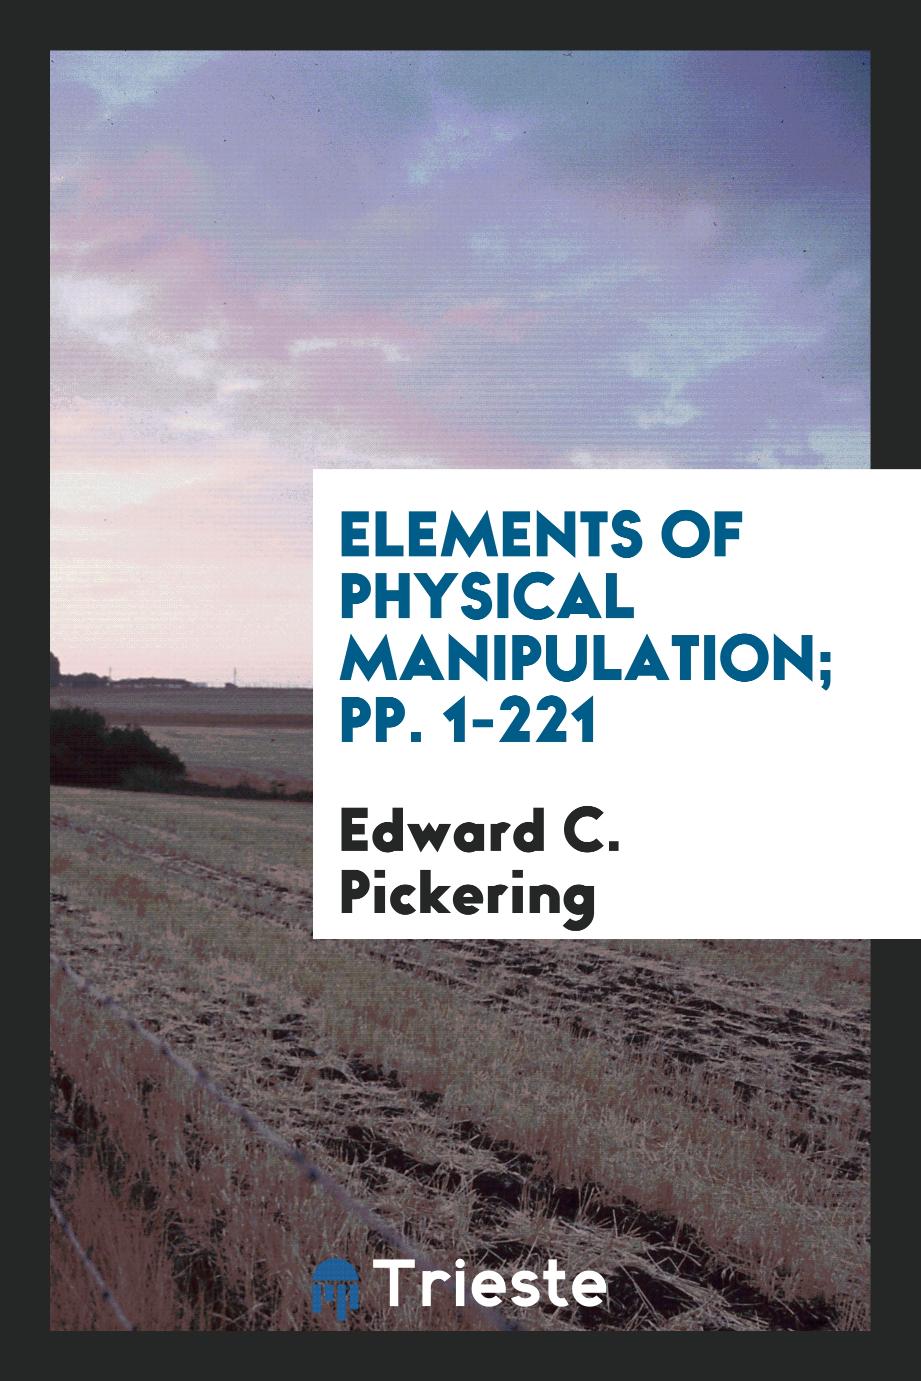 Elements of Physical Manipulation; pp. 1-221